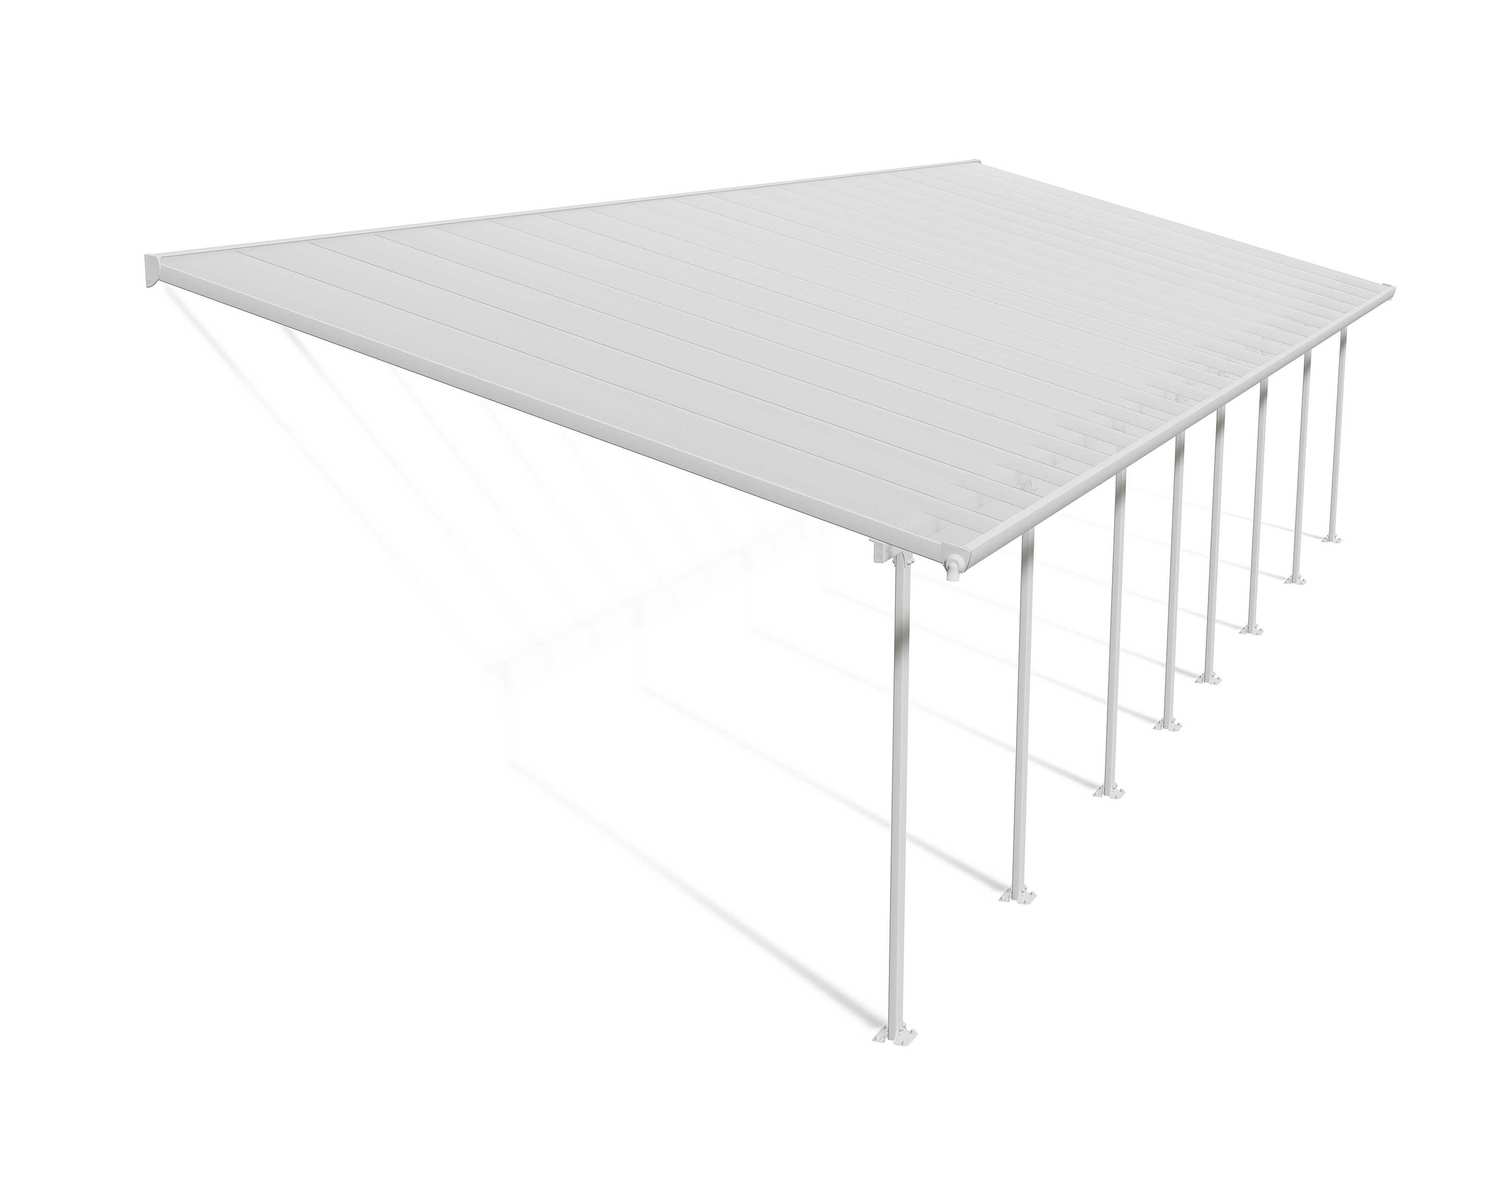 Patio Cover Kit Feria 4 ft. x 12.12 ft. White Structure &amp; Clear Multi Wall Glazing